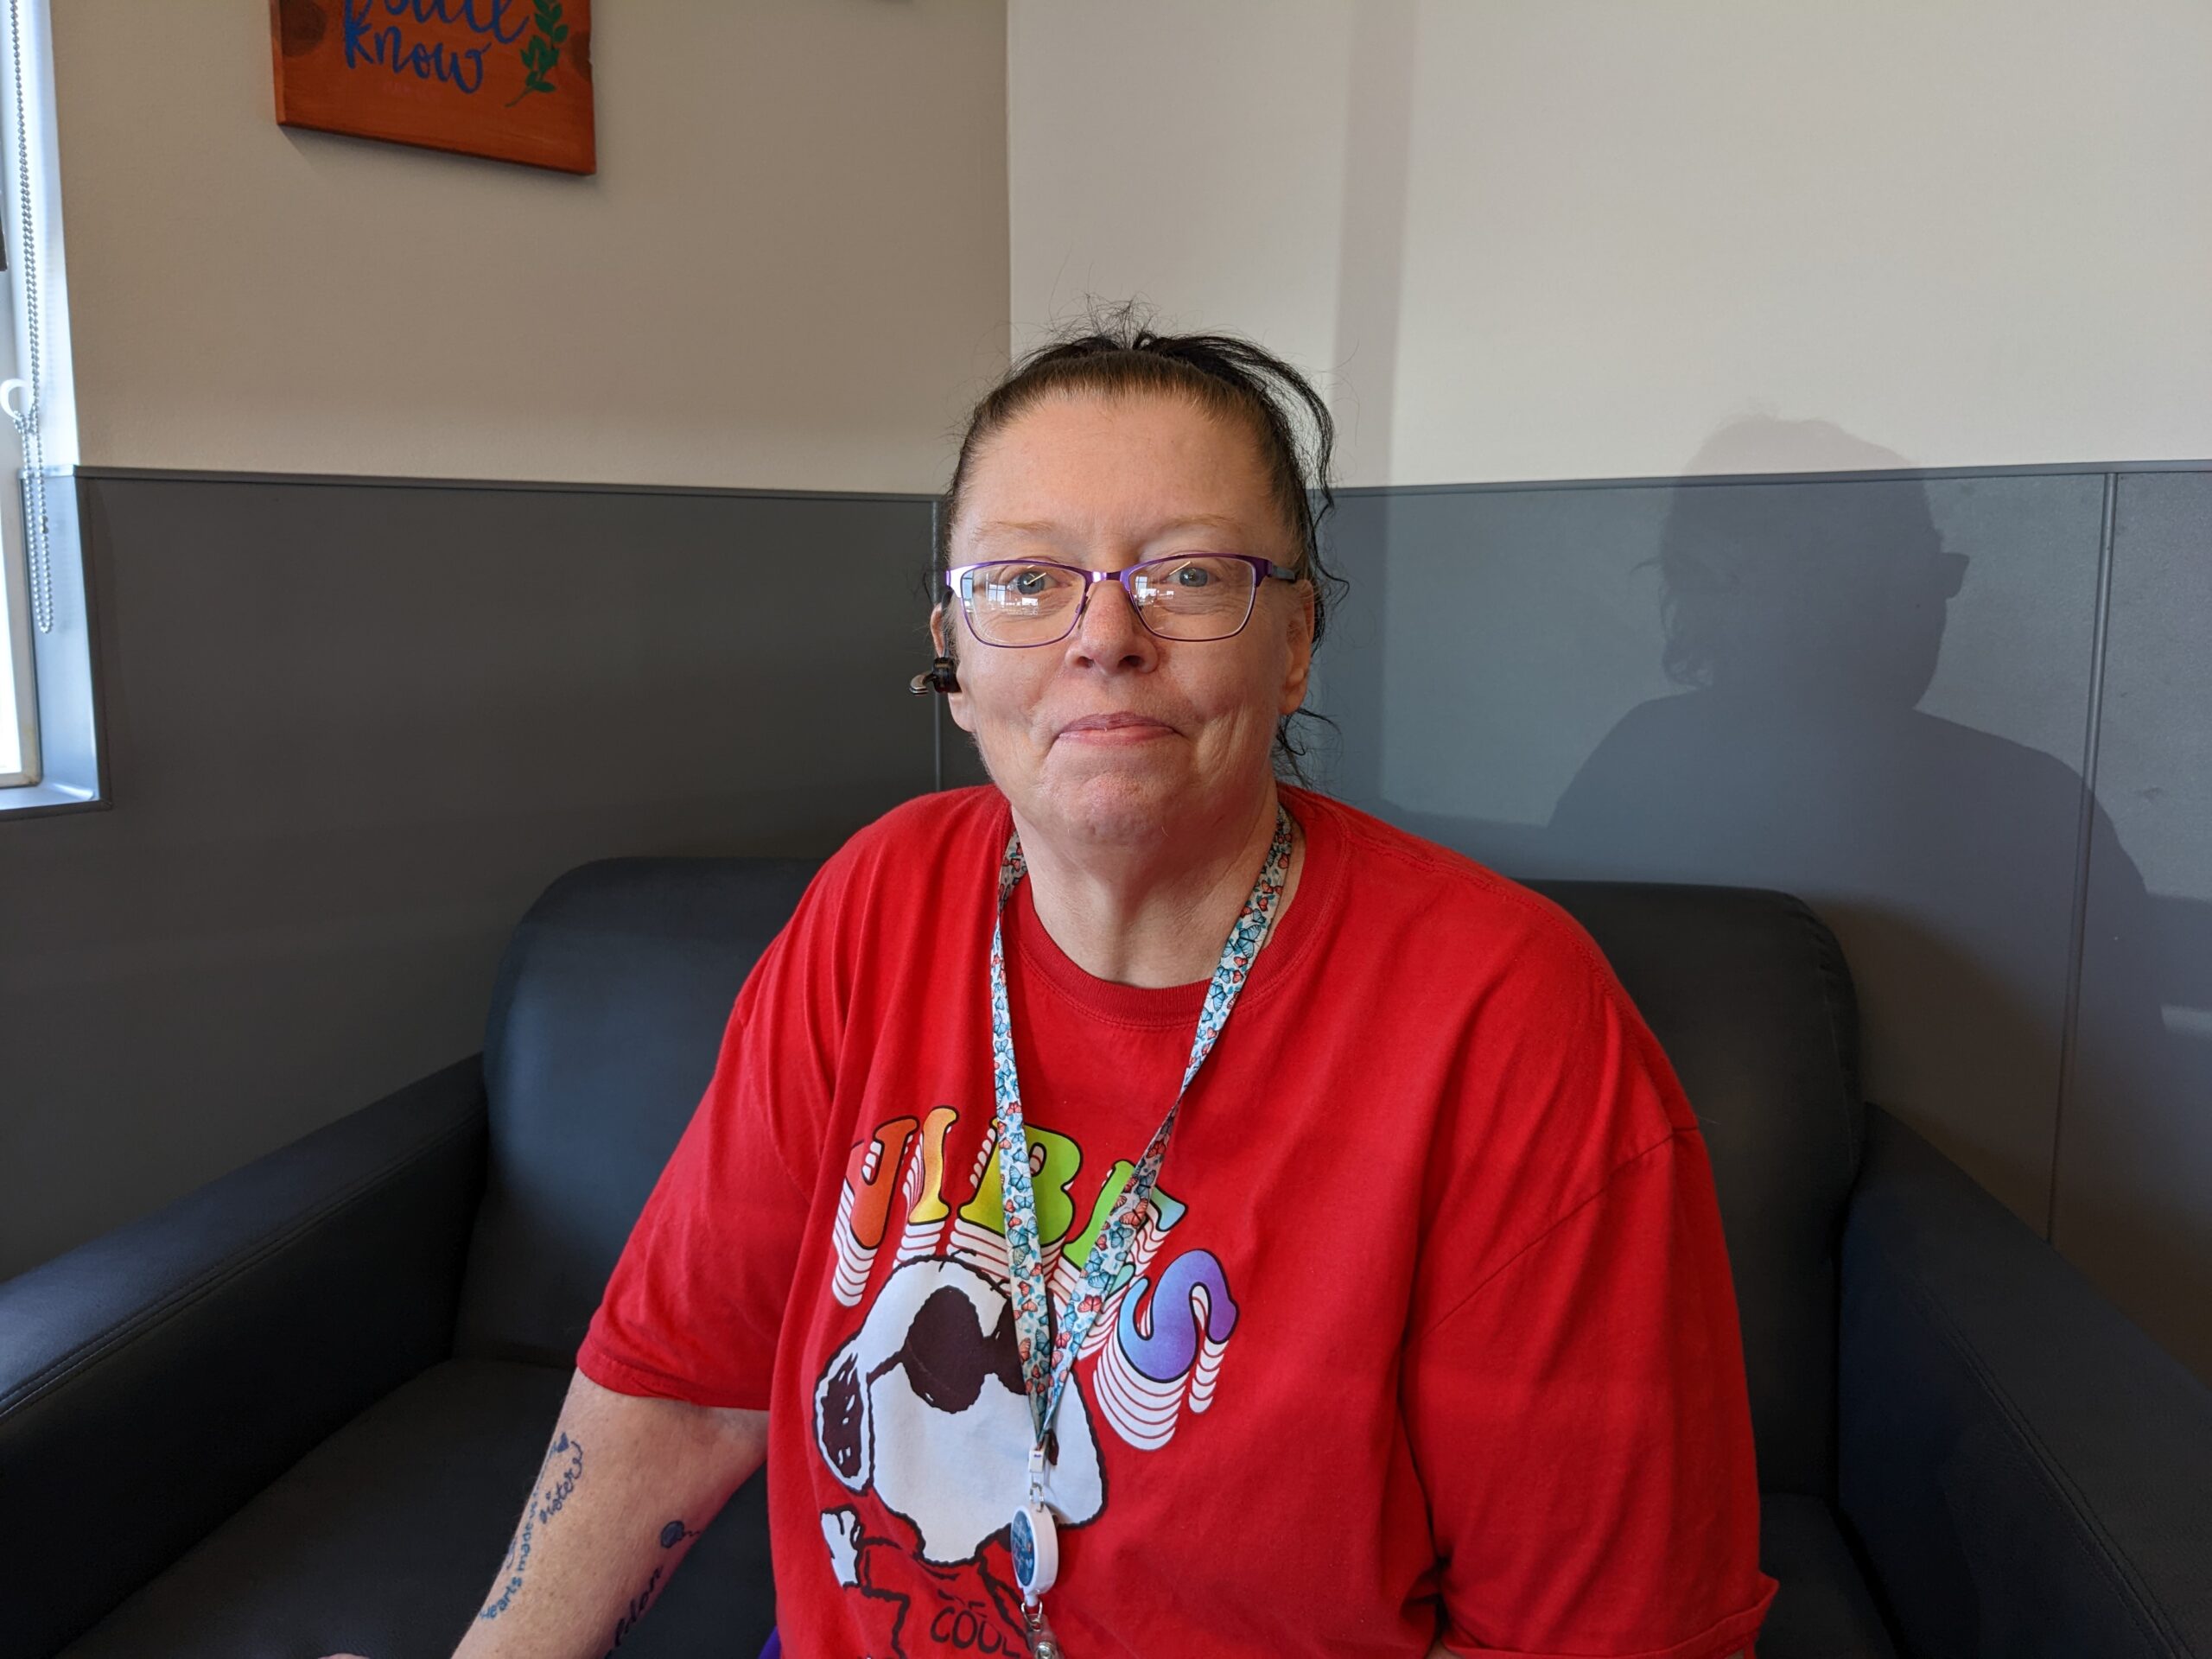 Sheila’s Story – Finding Hope in The Kitchen’s Homeless Shelter